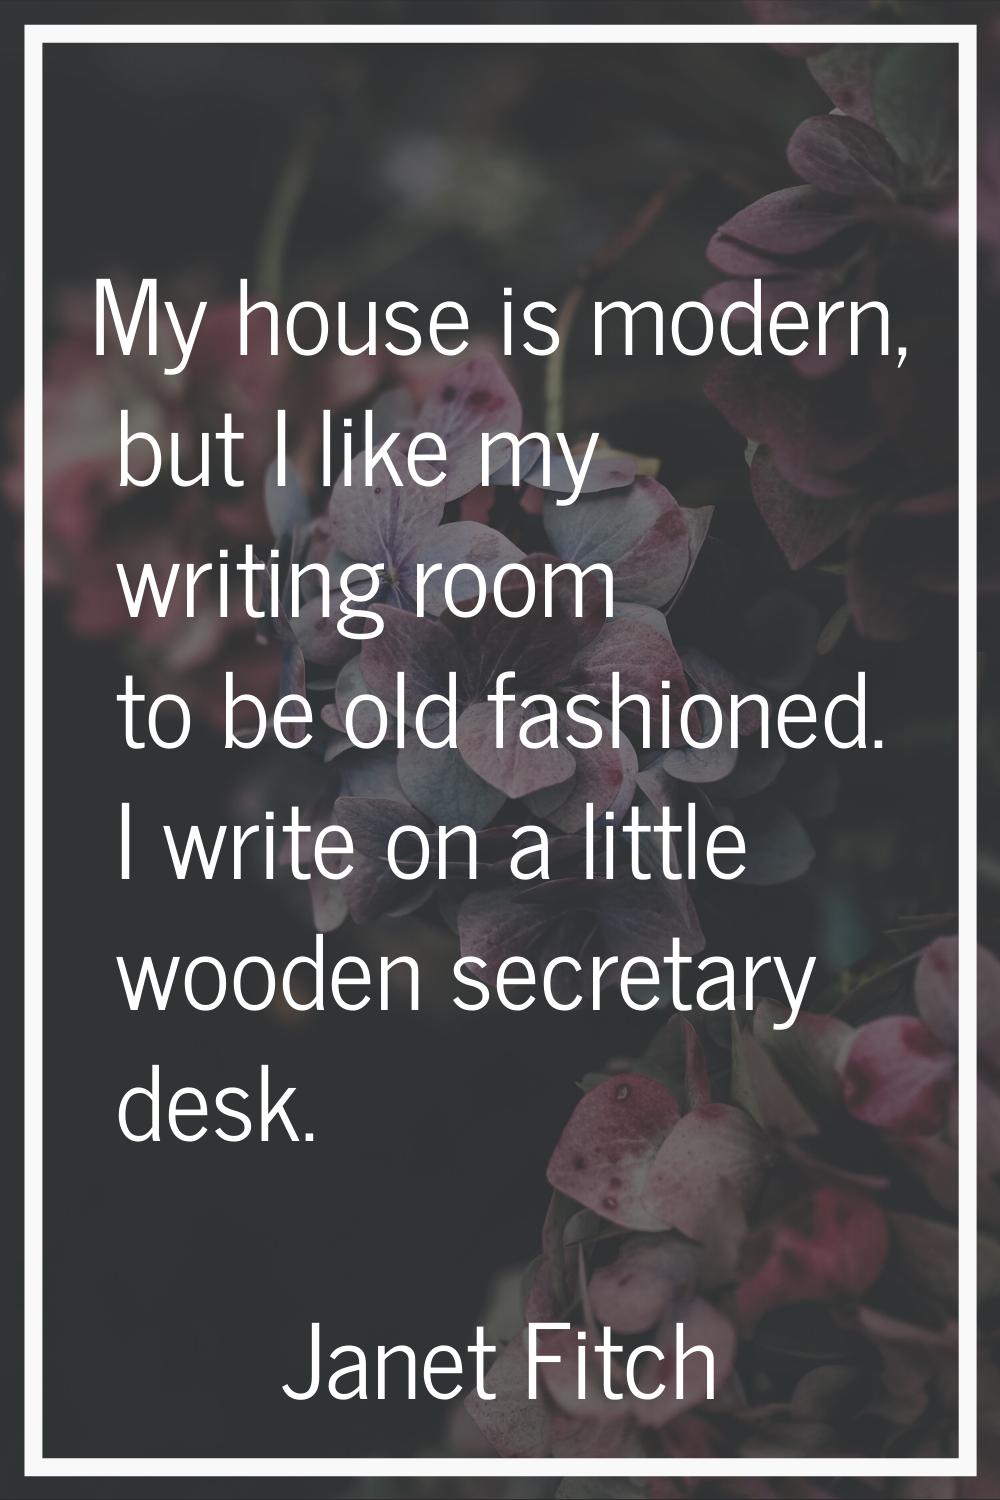 My house is modern, but I like my writing room to be old fashioned. I write on a little wooden secr